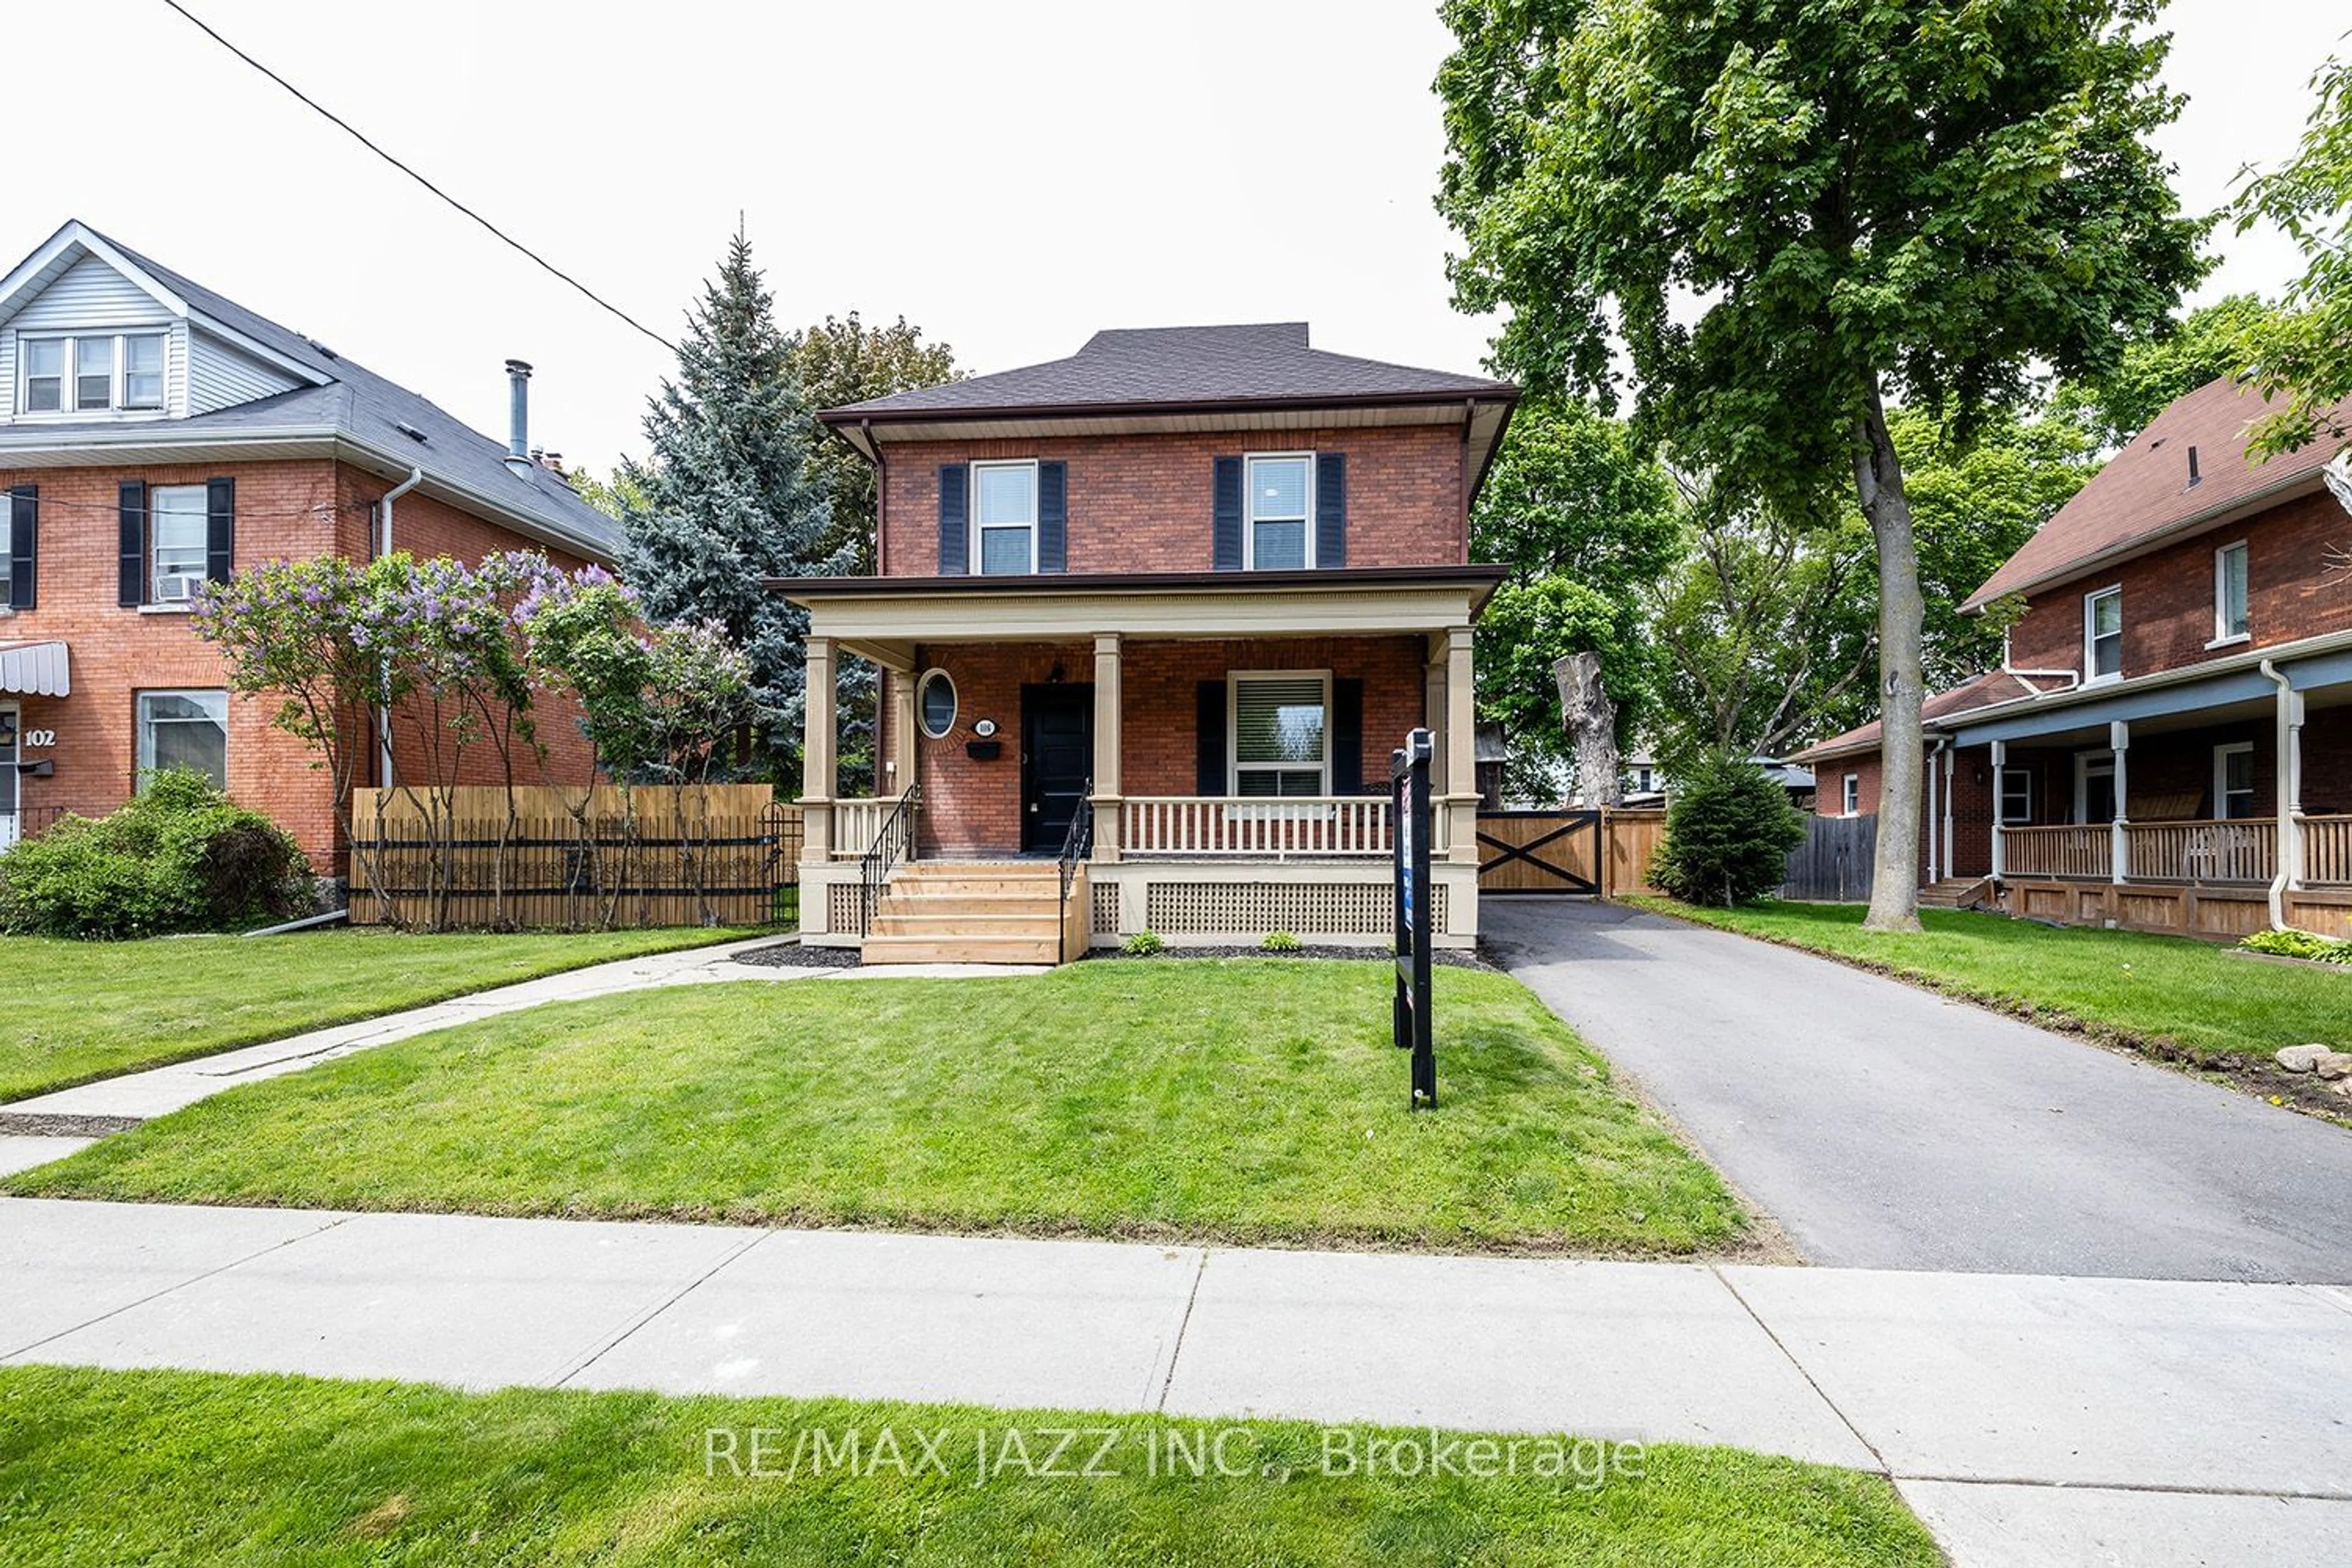 Home with brick exterior material for 106 Elgin St, Oshawa Ontario L1G 1T3